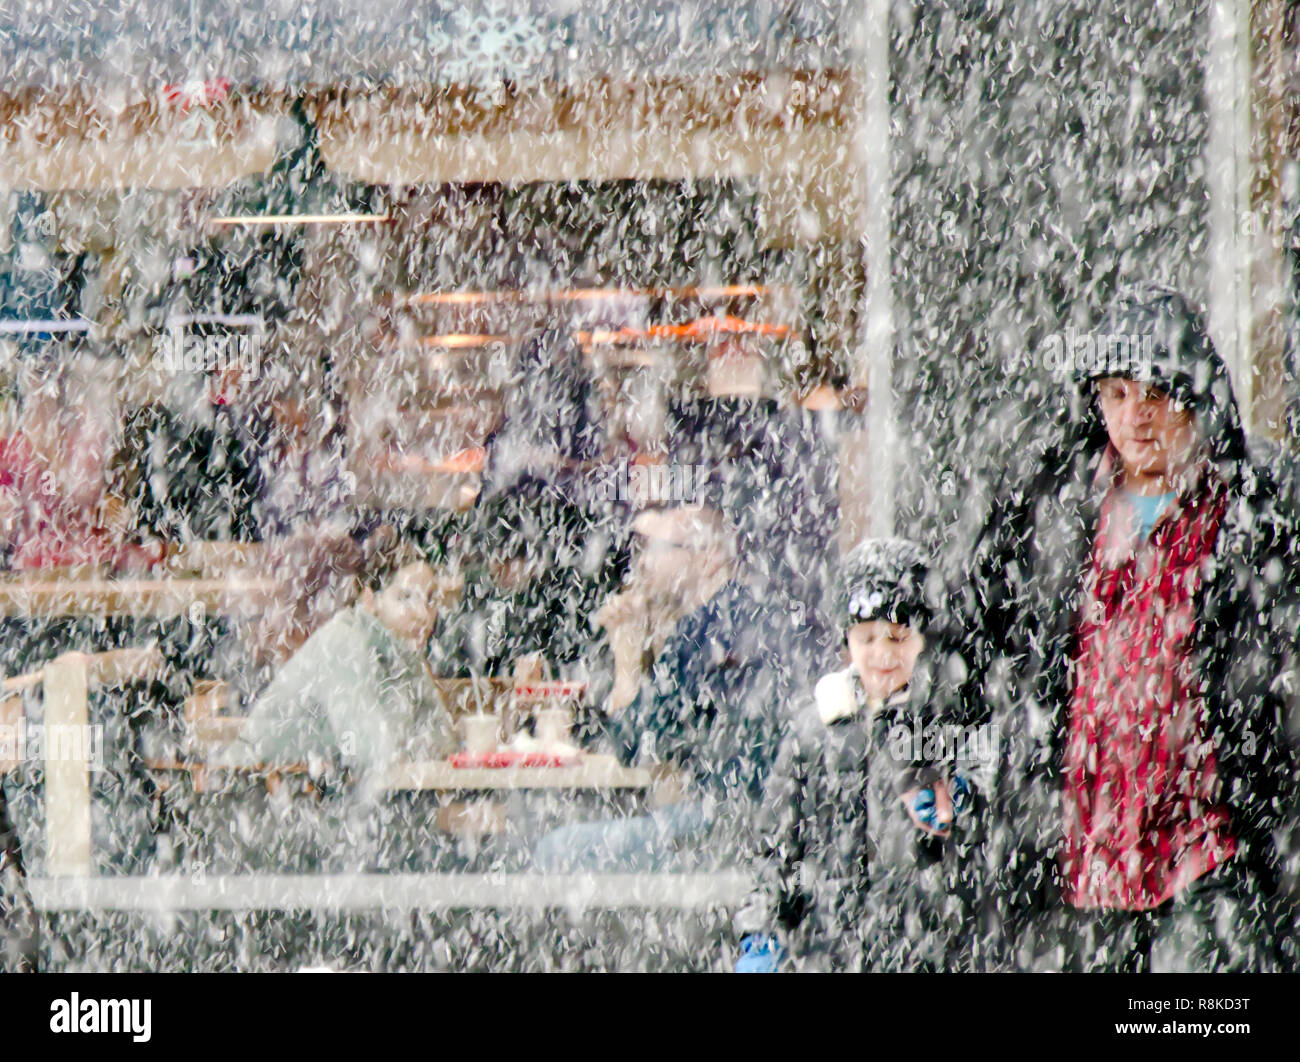 Belgrade, Serbia - December 15, 2018: Father and son crossing he street in heavy snowfall and a young couple sitting in a restaurant behind them Stock Photo